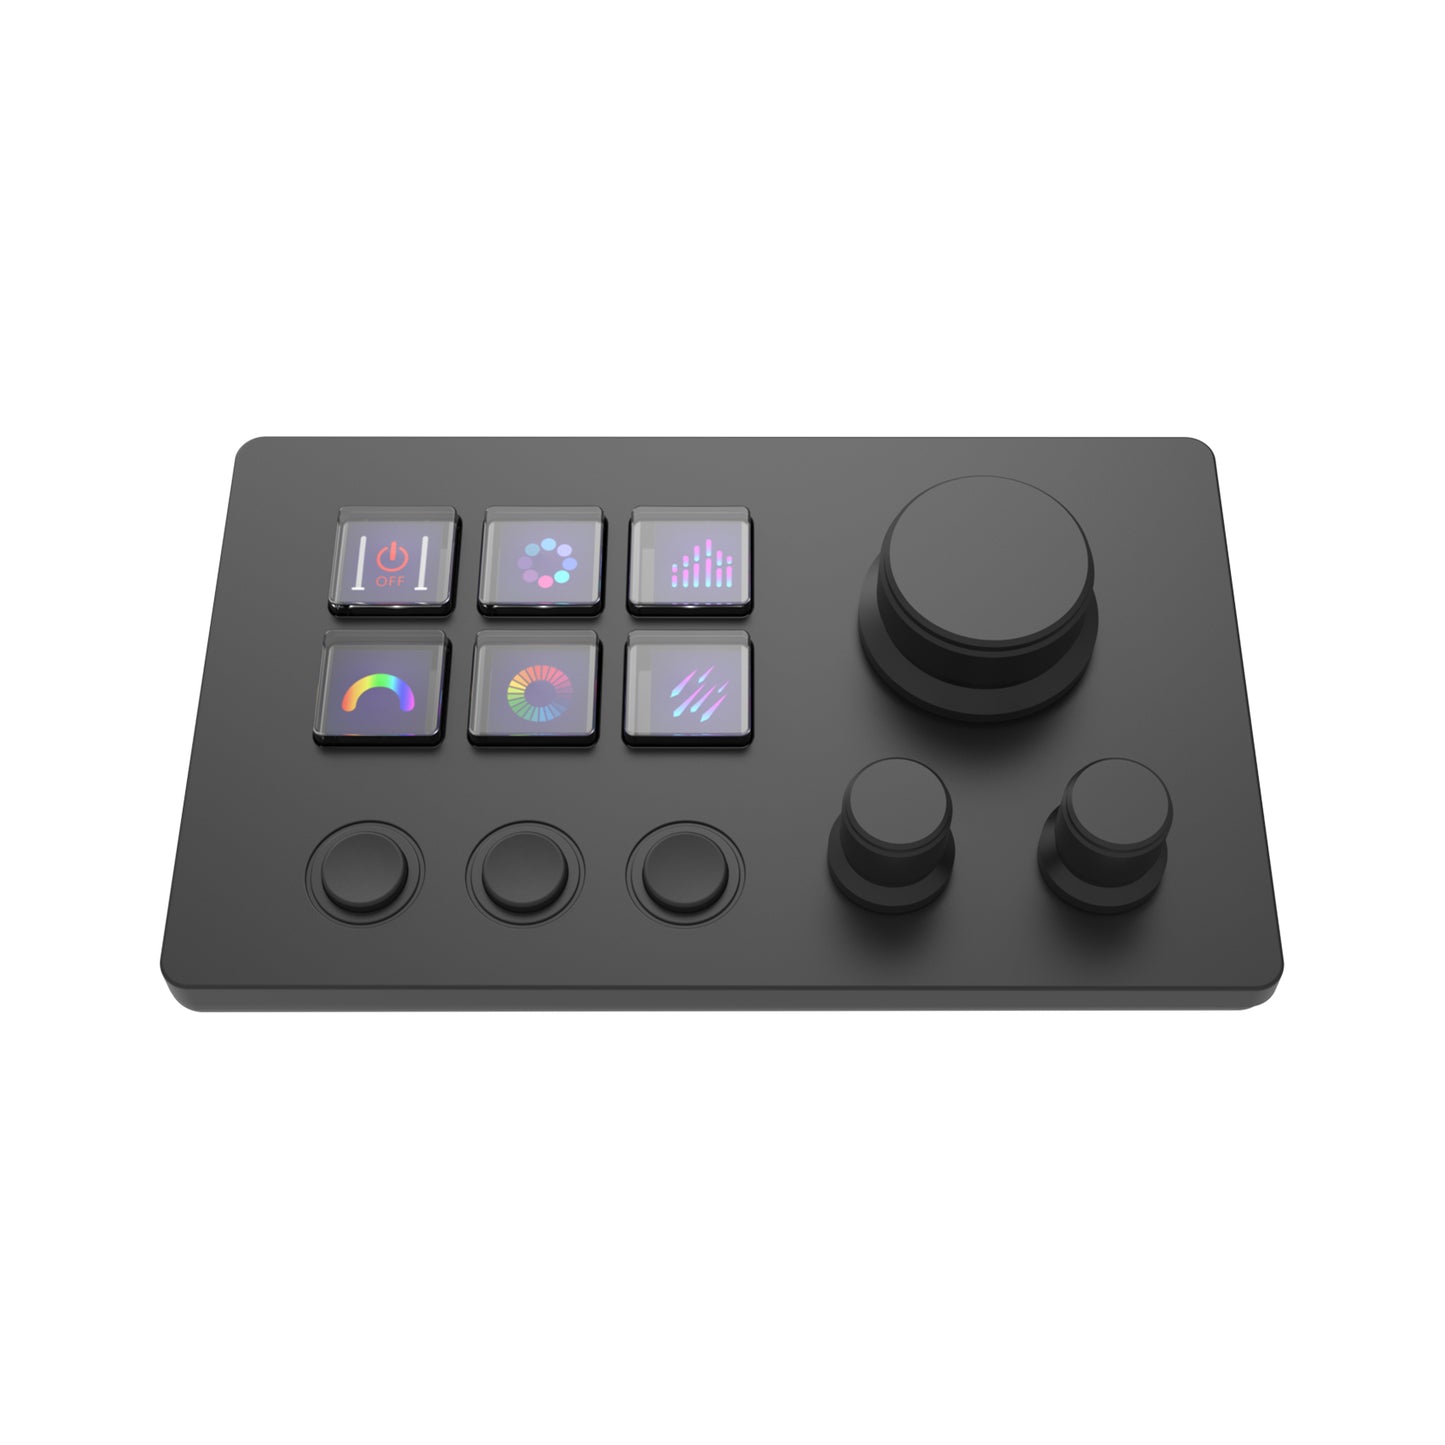 Stream Dock– The Custom Console for Live Streaming, Photo and Video Editing with Customizable Buttons, Dials and LED touchscreen